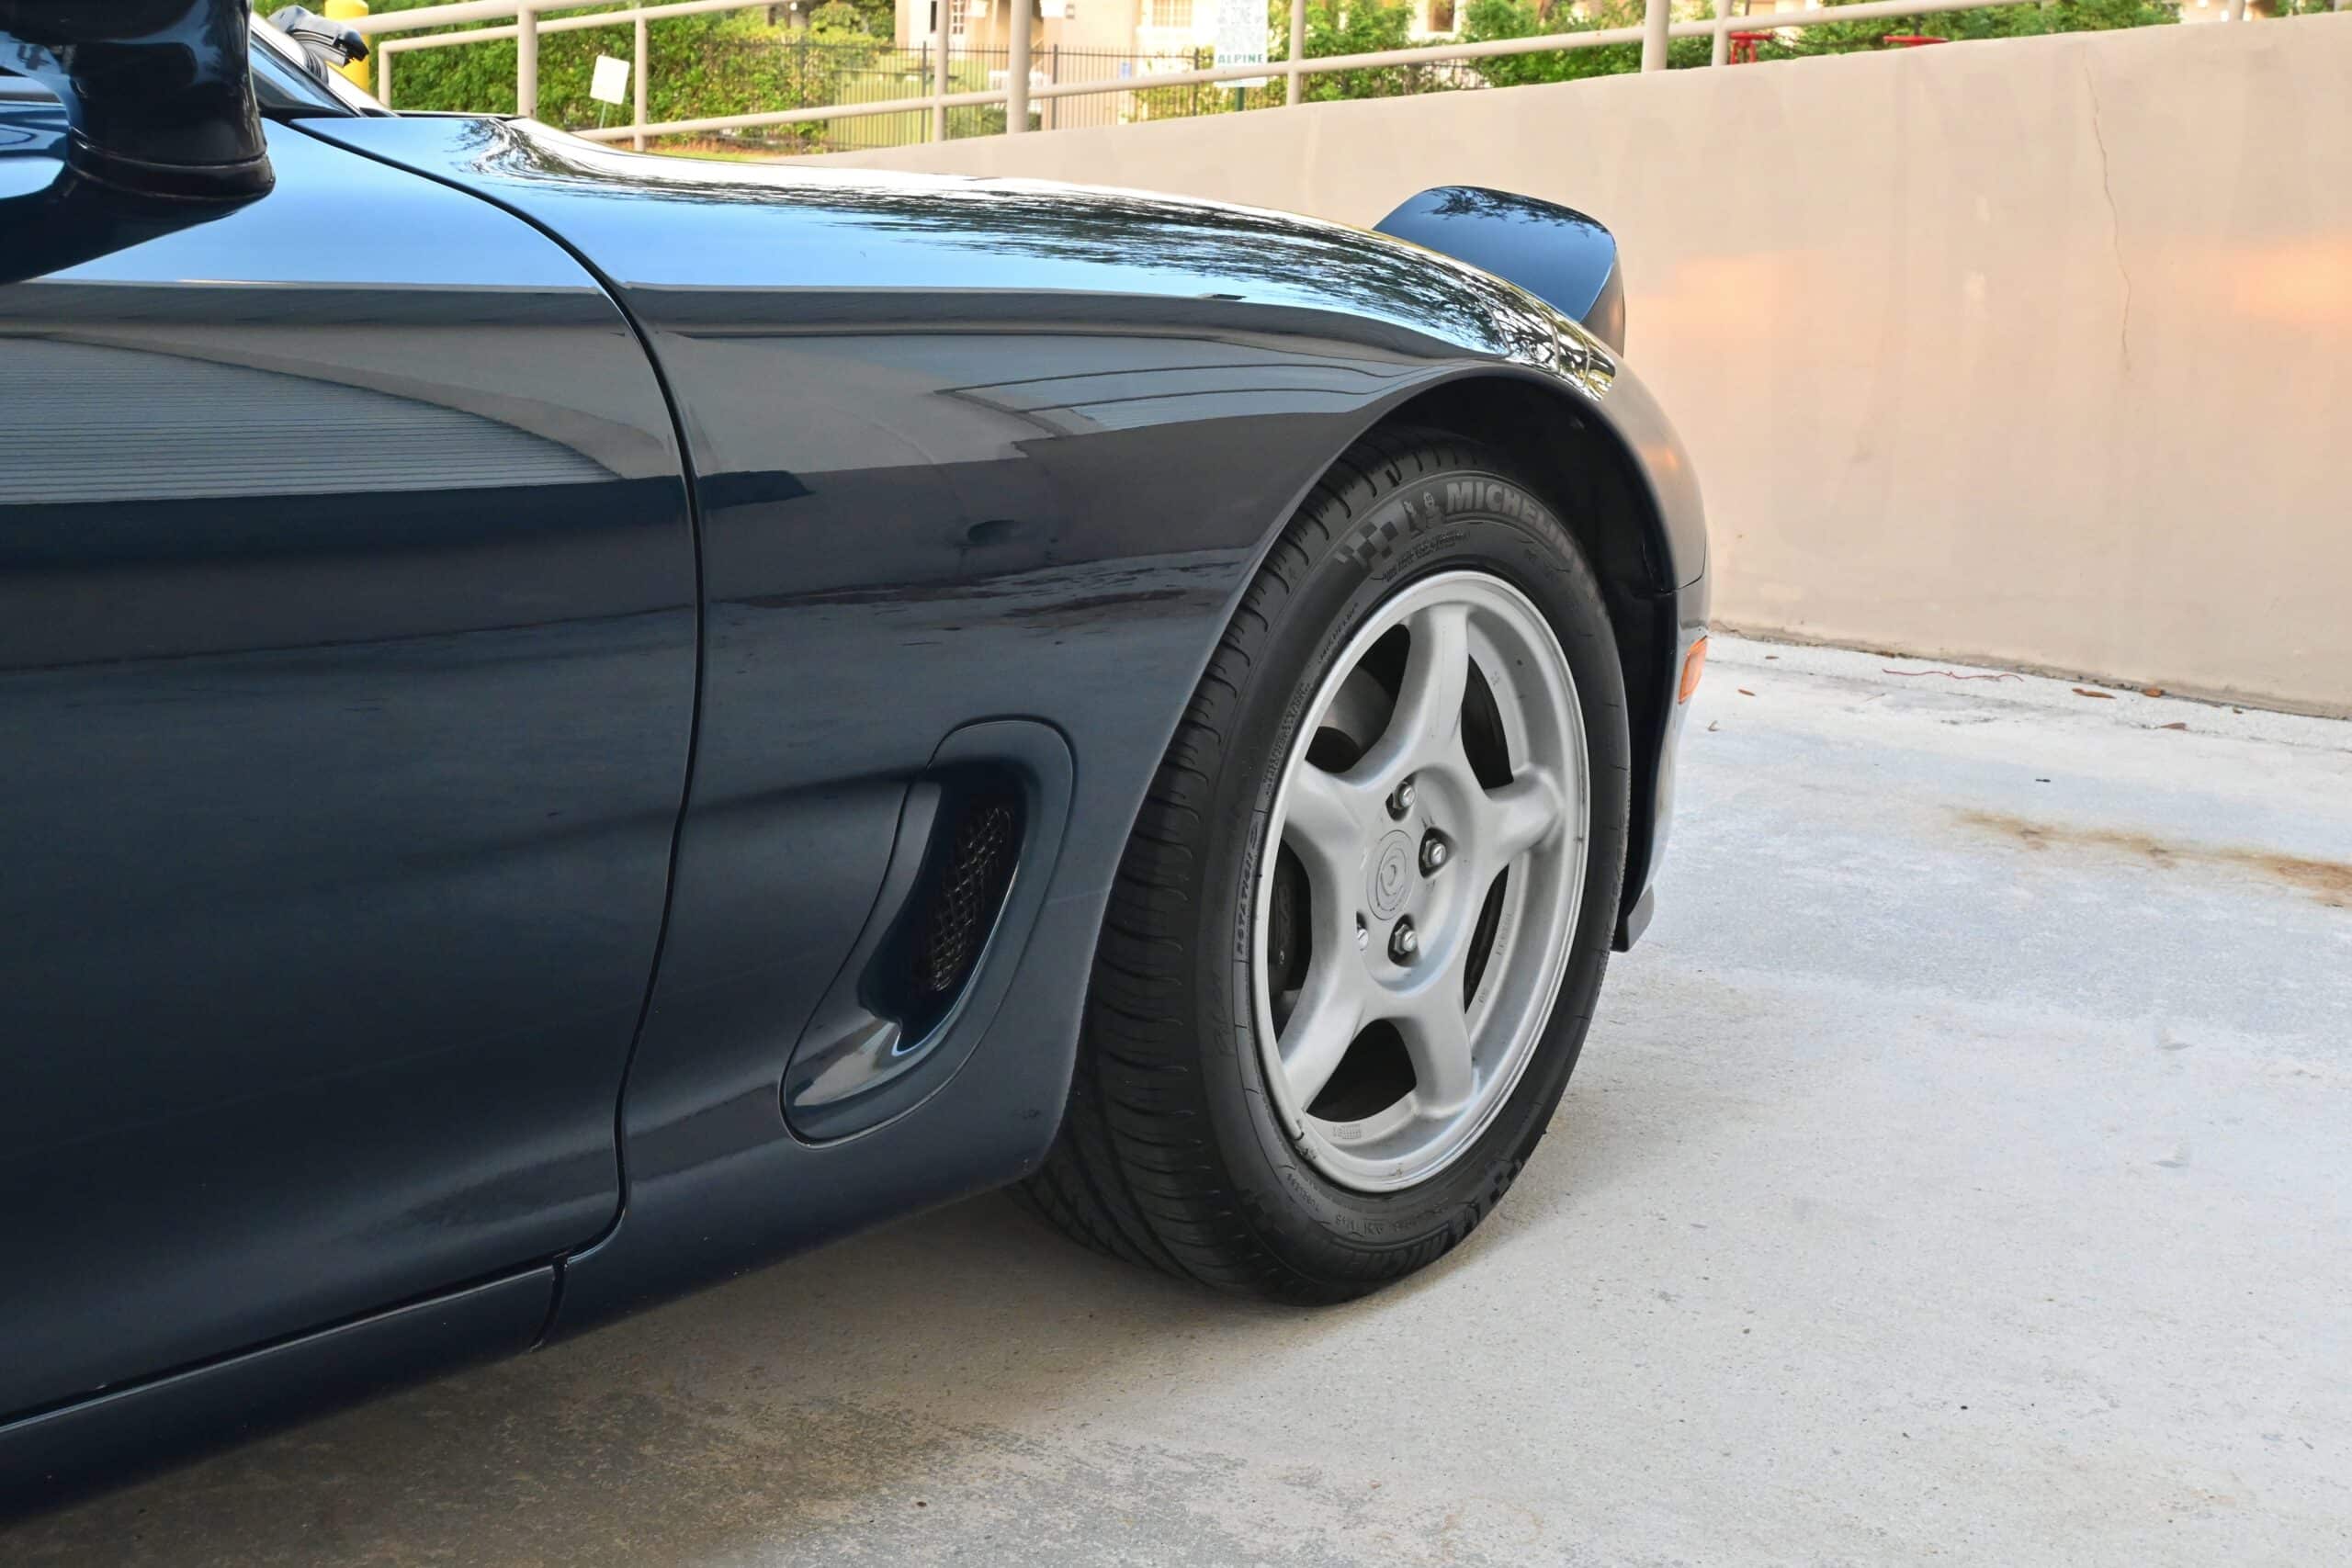 1993 Mazda RX-7 Turbo Original Montego Blue- Only 37K Miles- 5 Speed- Fresh Engine Reseal / New Clutch